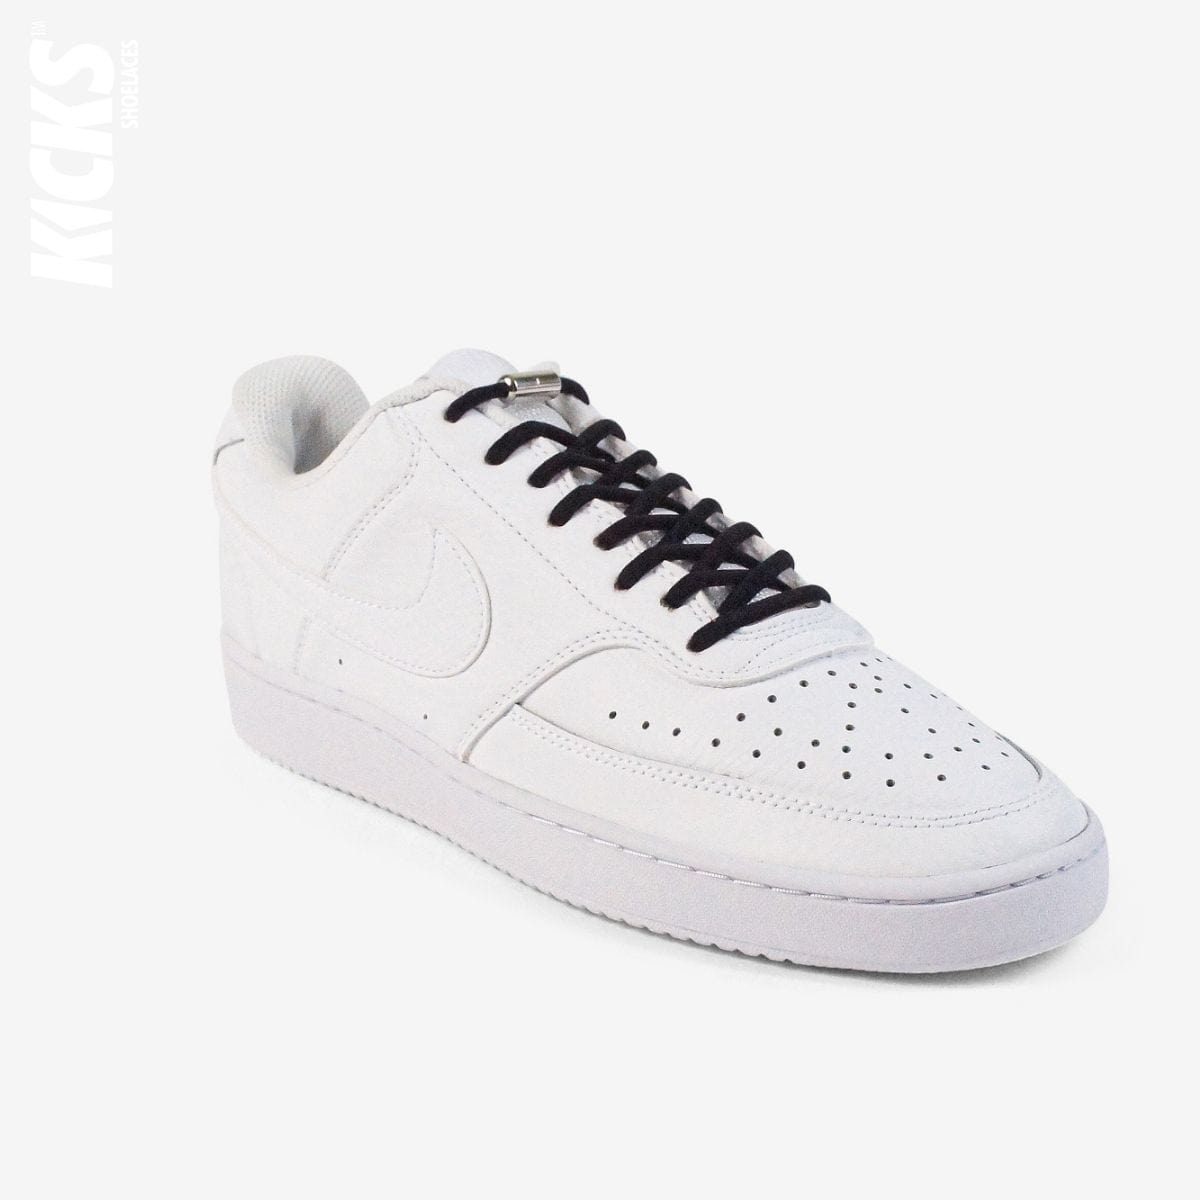 round-no-tie-shoelaces-with-black-laces-on-nike-white-sneakers-by-kicks-shoelaces